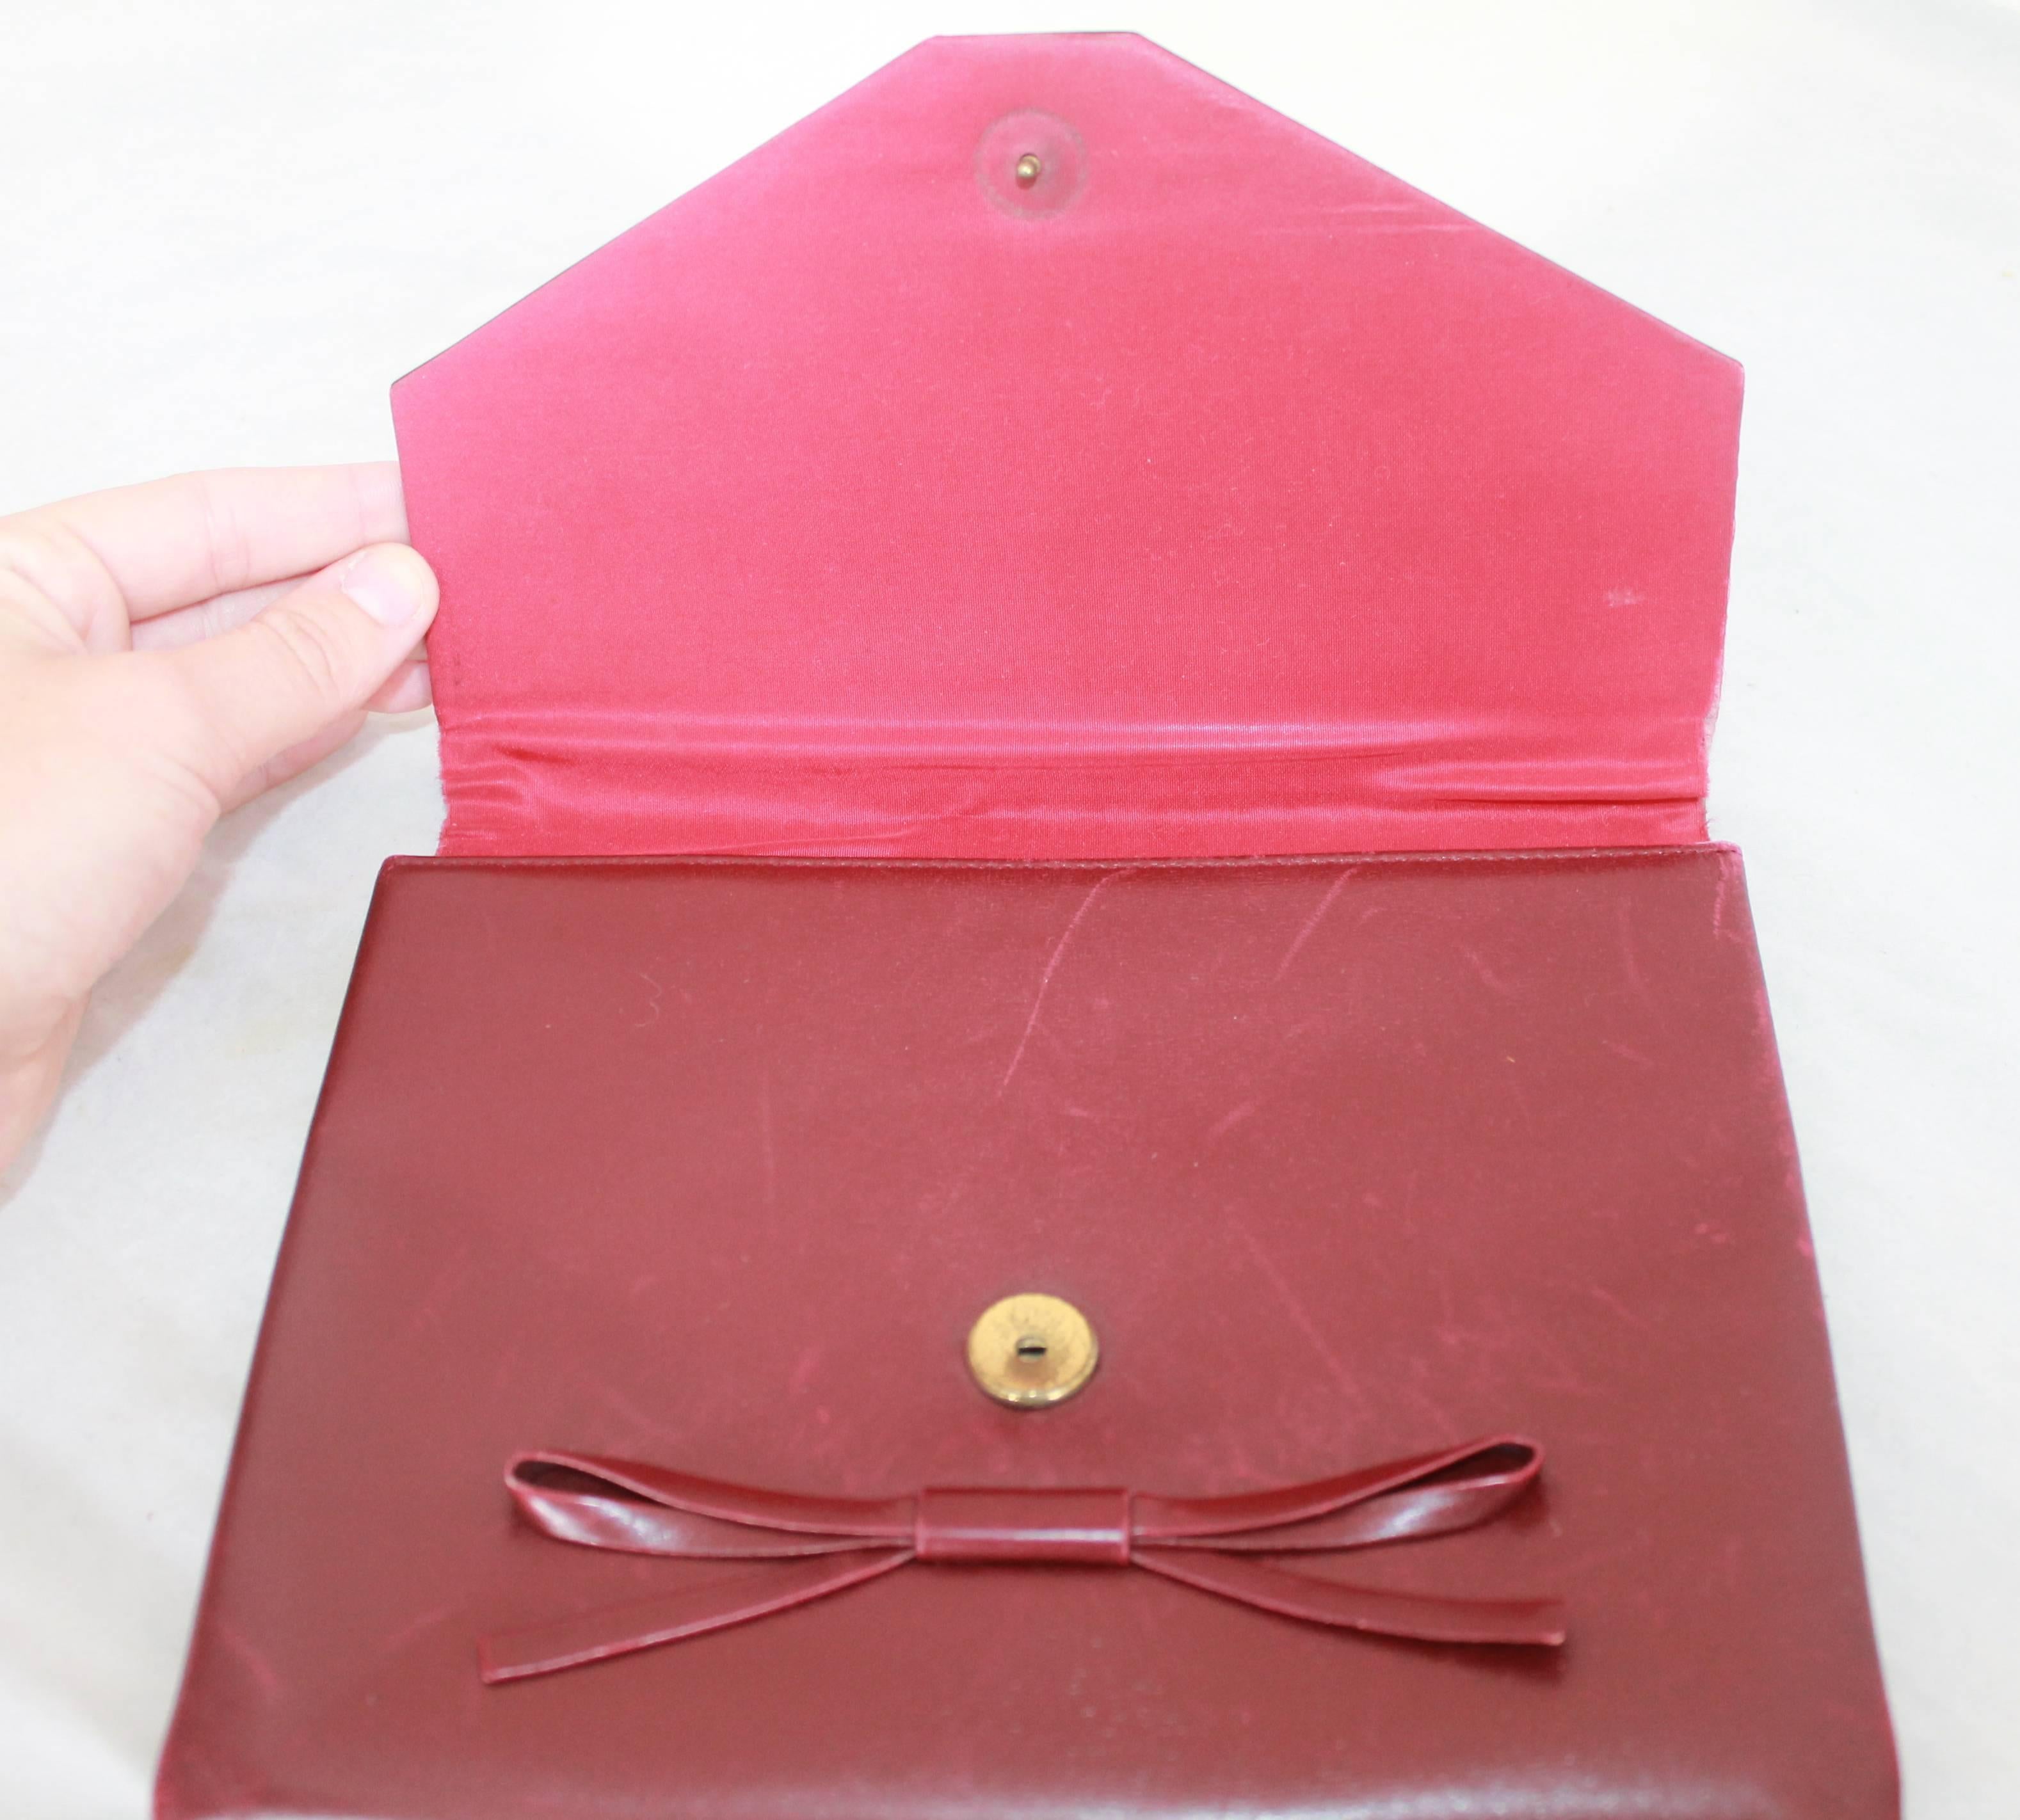 Black Christian Dior Vintage Burgundy Leather Clutch with Bow - circa 1990's For Sale